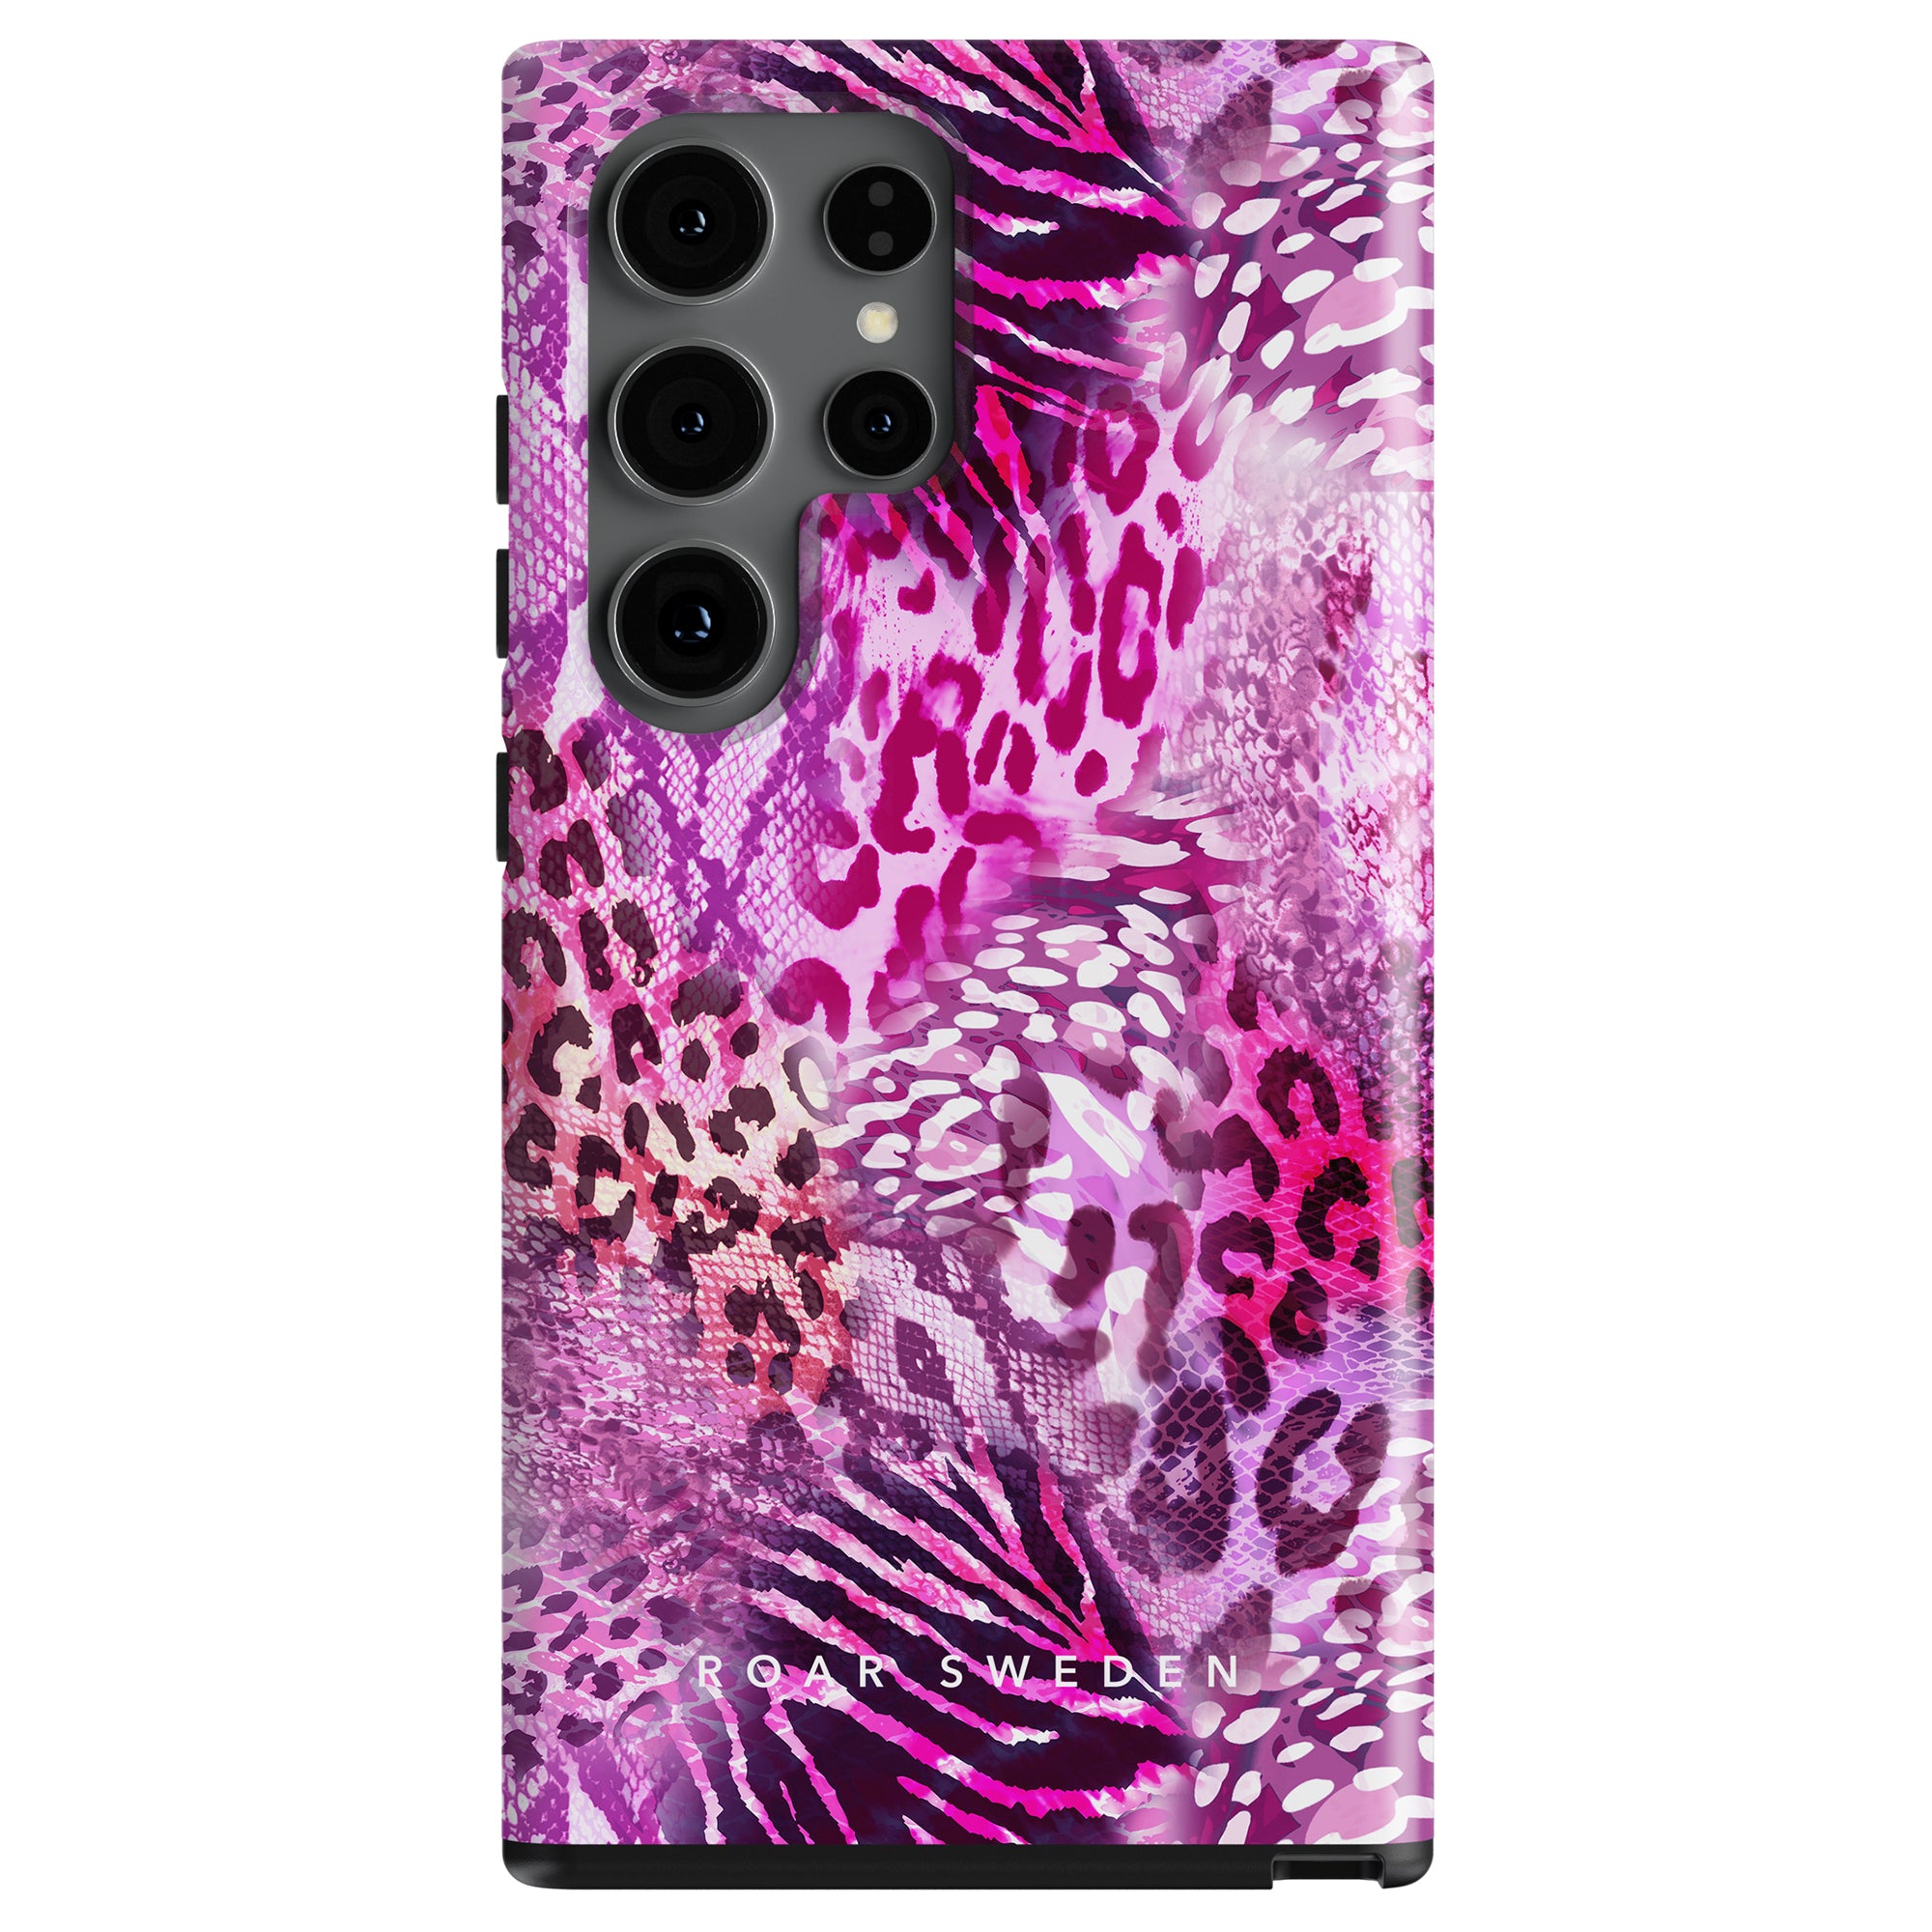 A smartphone case from the Swirl Leopard - Tough Case featuring a vibrant purple and pink leopard print design with four camera lens cutouts at the top.